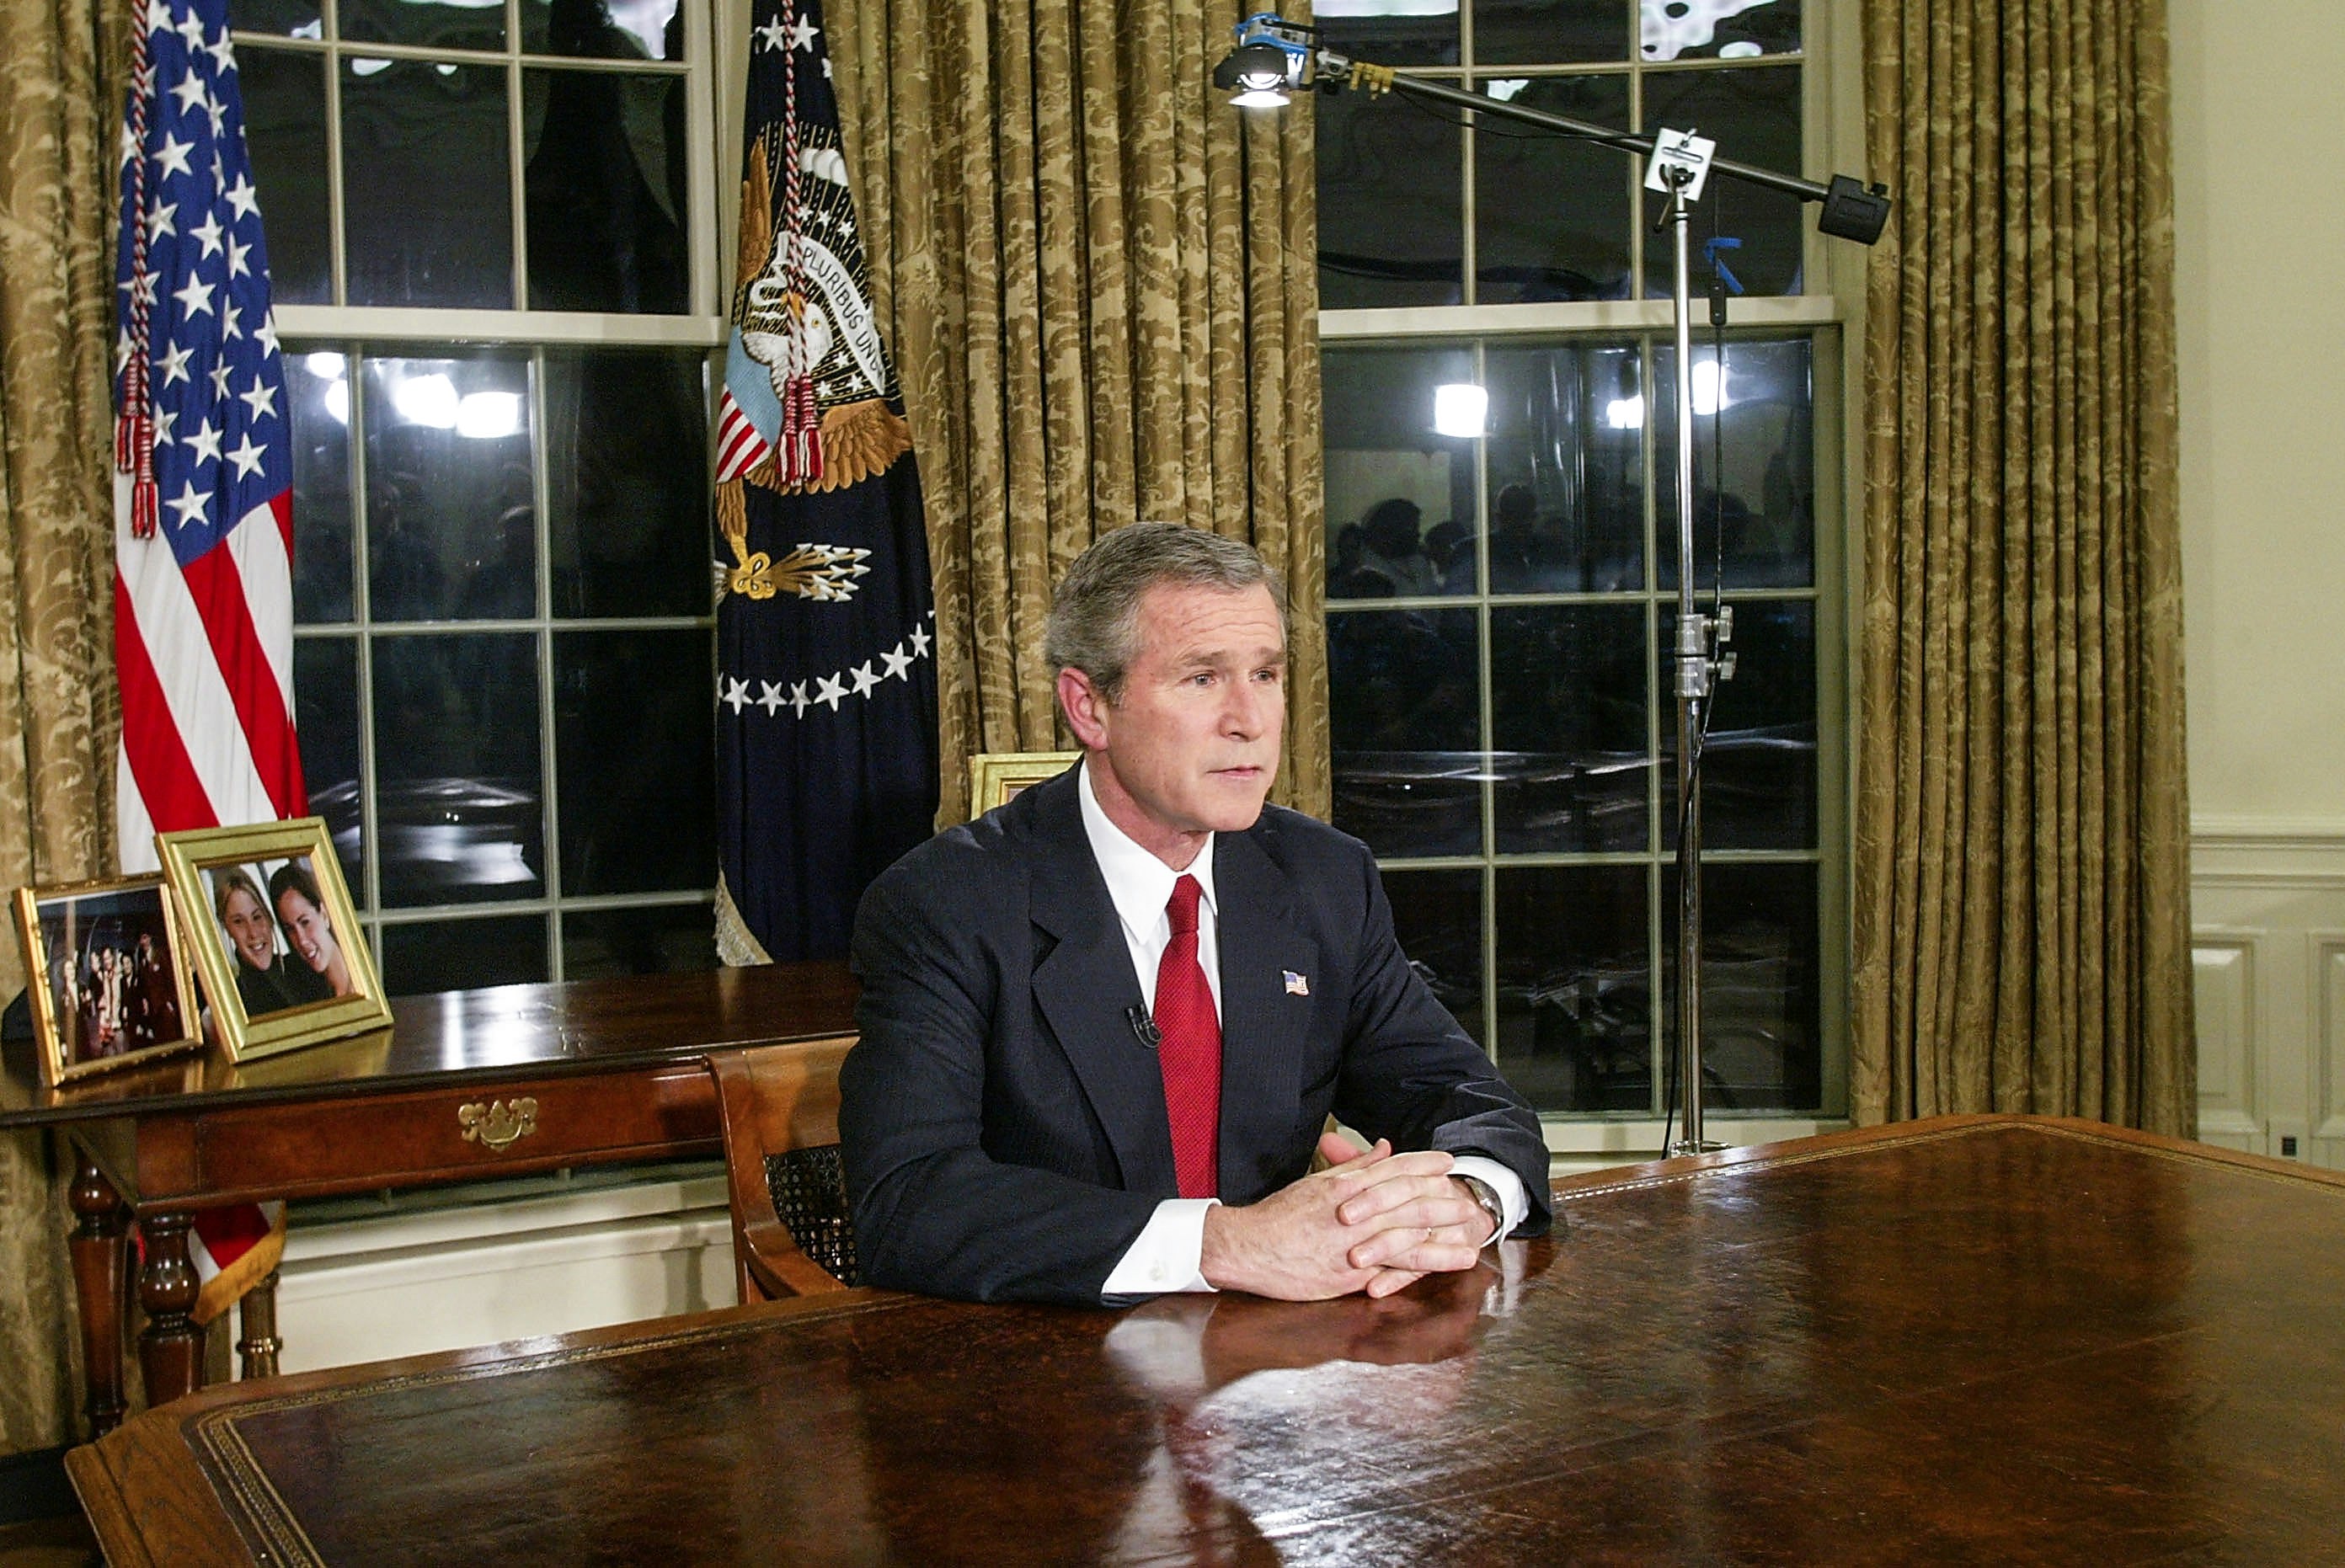 WASHINGTON - MARCH 19:  U.S. President George W. Bush  addresses the nation March 19, 2003 in the Oval Office of the White House in Washington, DC. Bush announced that the U.S. military struck at "targets of opportunity" in Iraq March 19, 2003 in Washington, DC. Air defense sirens and anti-aircraft fire was reported briefly in Baghdad.  (Photo by Alex Wong/Getty Images)